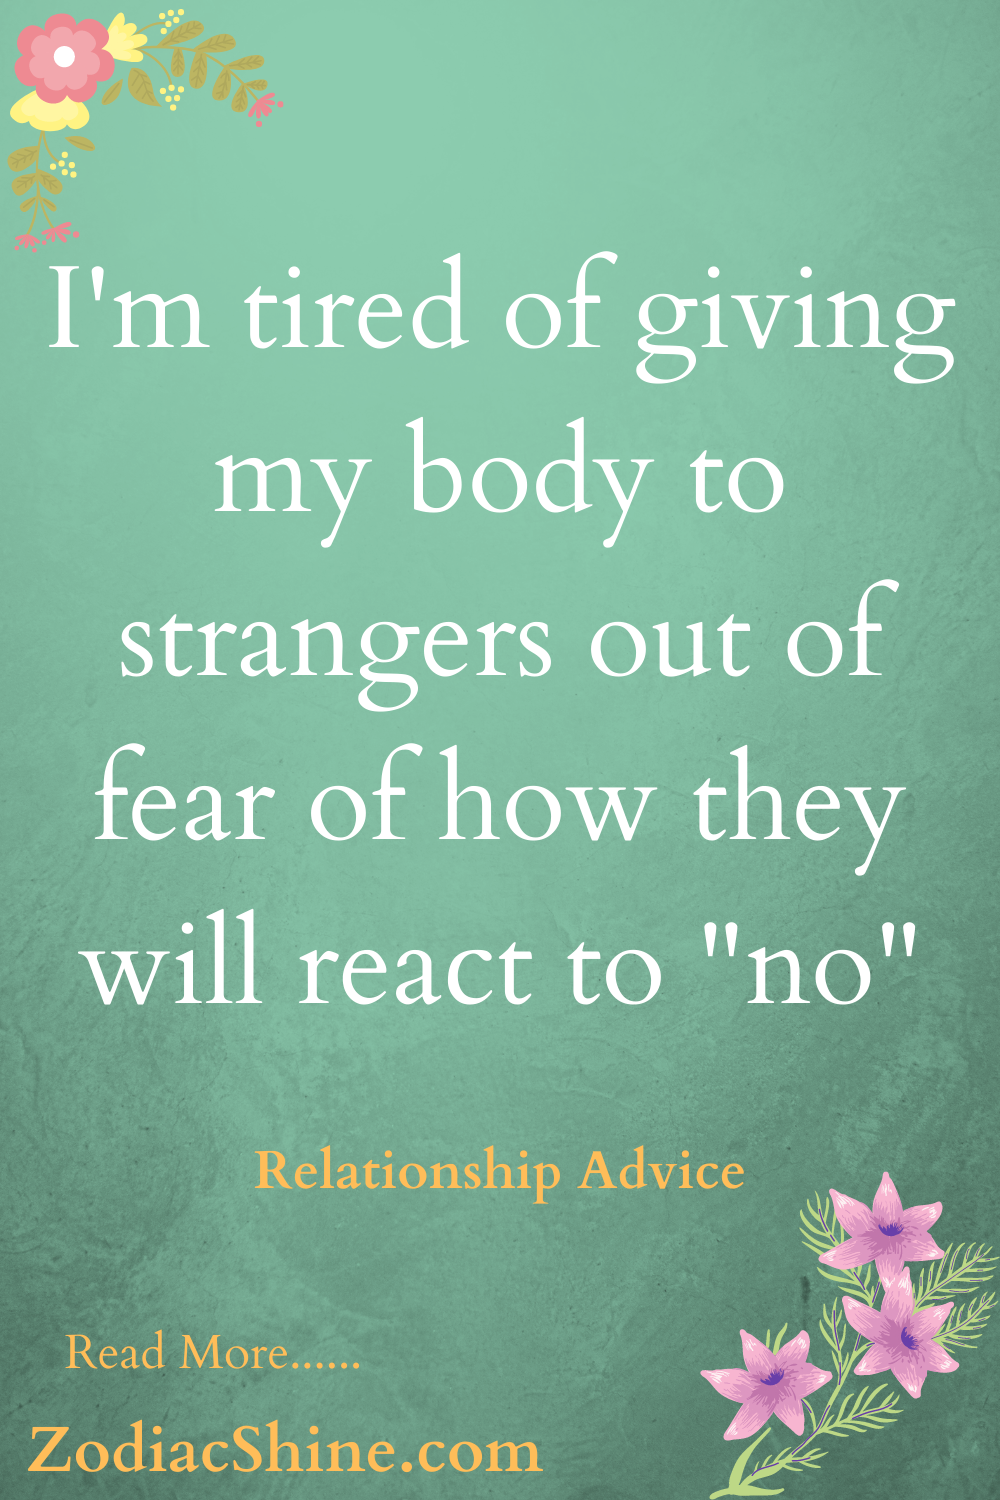 I'm tired of giving my body to strangers out of fear of how they will react to no